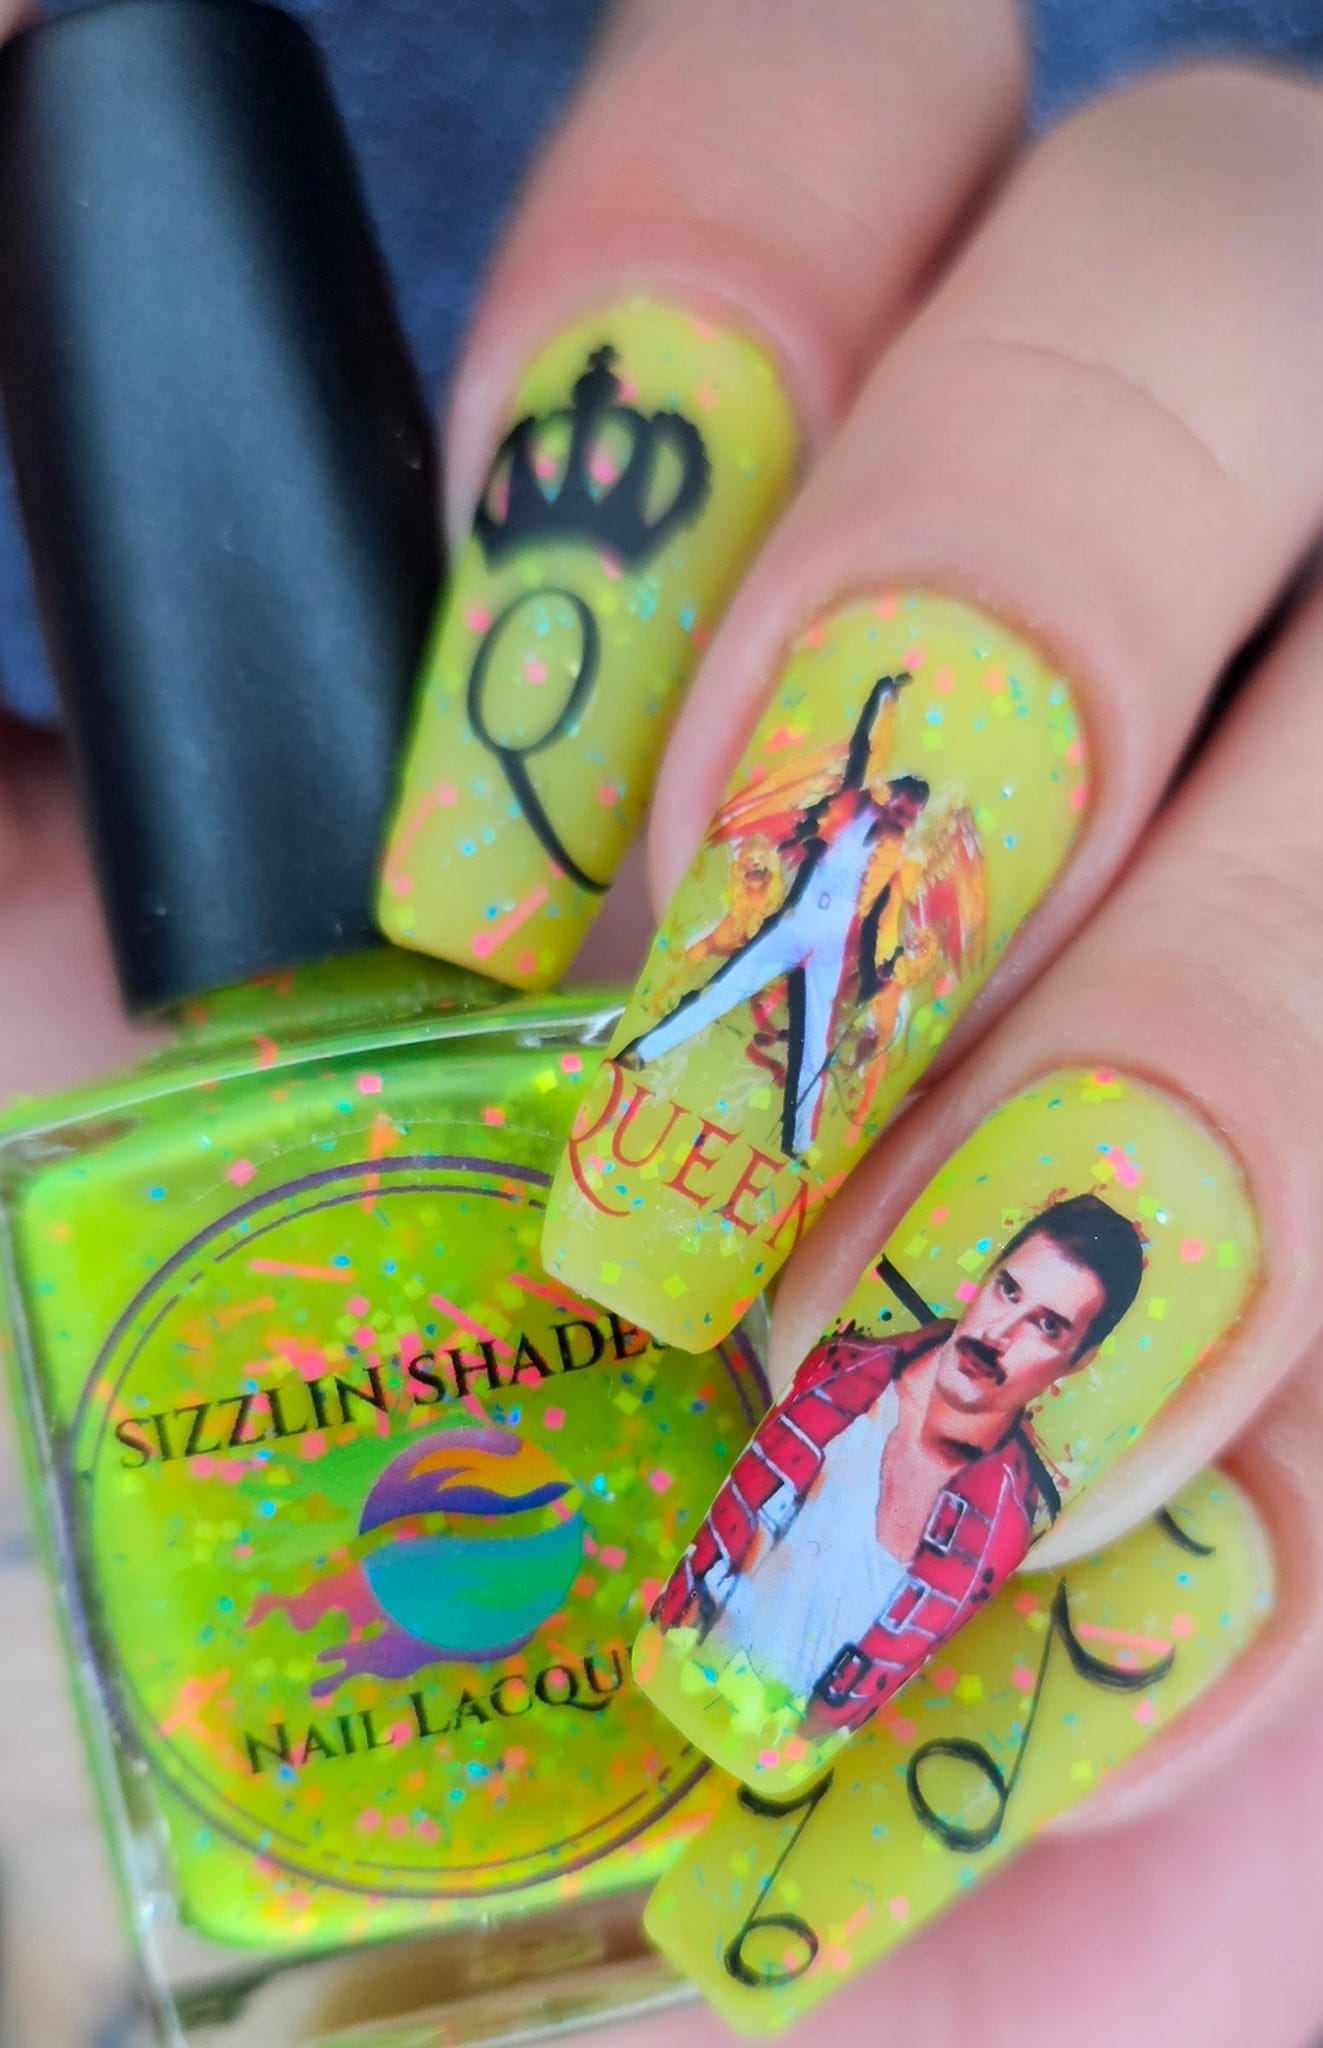 Queen Nail Art - We Will Rock You!